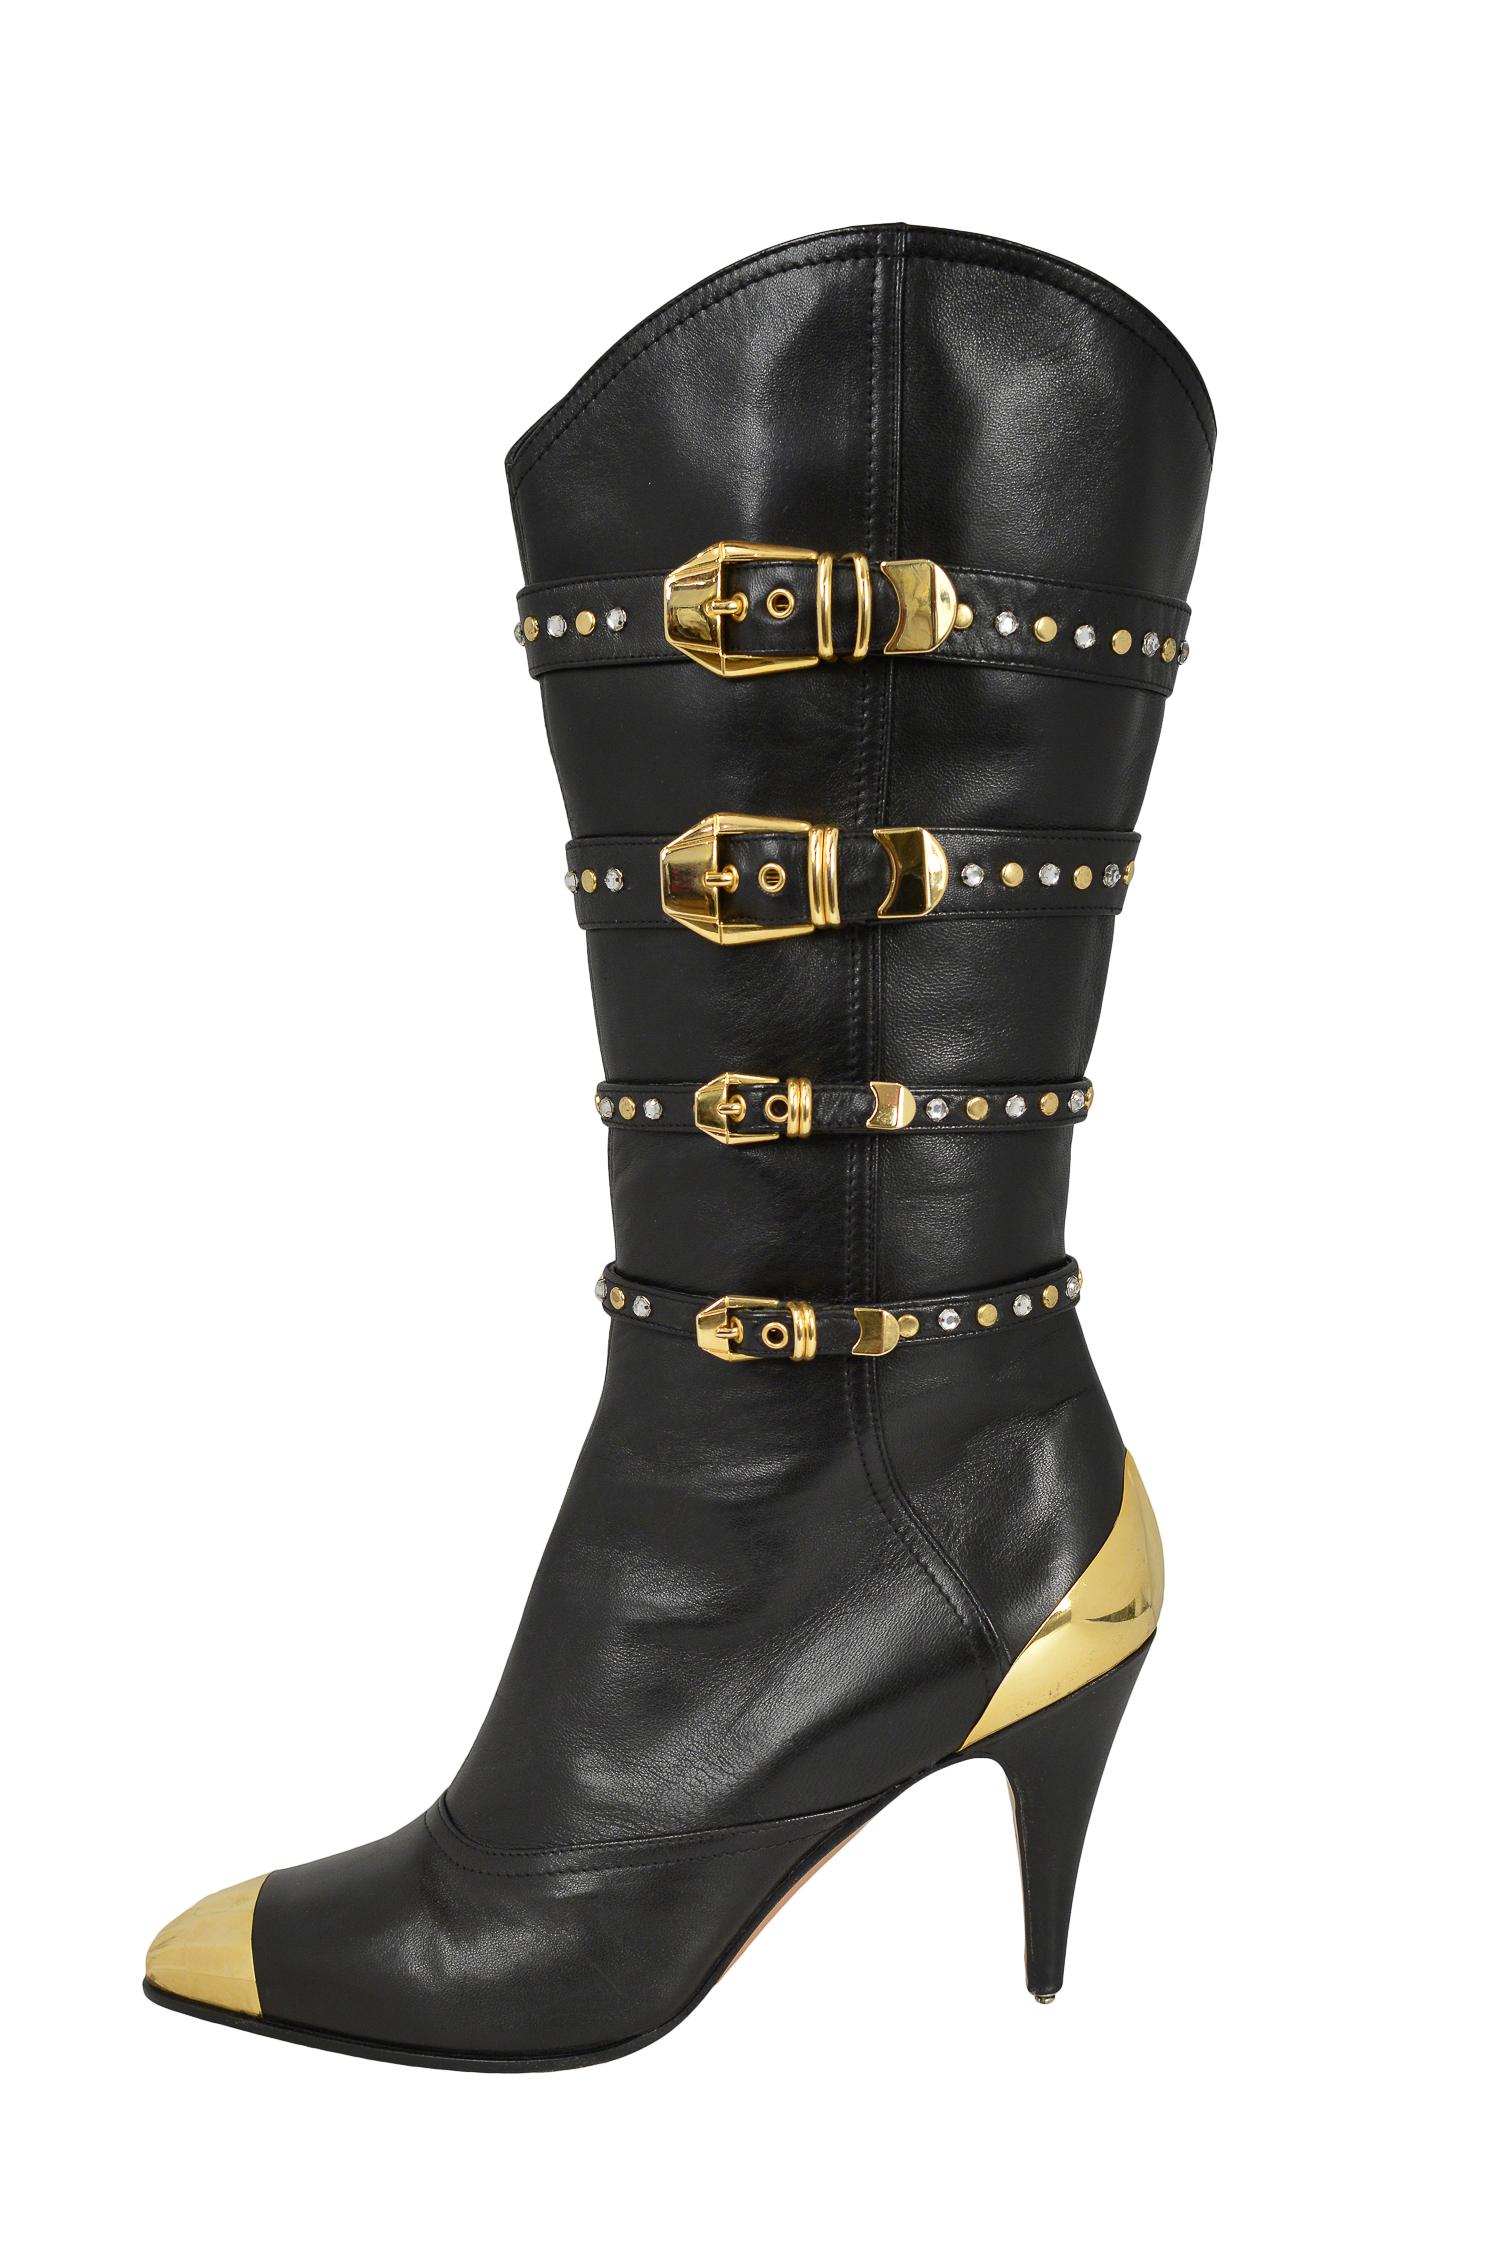 Vintage Gianni Versace black leather high heeled western boots with gold buckles, studs and cap toe & heel detail. From the Autumn/Winter 1992 Collection.

Never Worn; New. 

Size: 38.5
